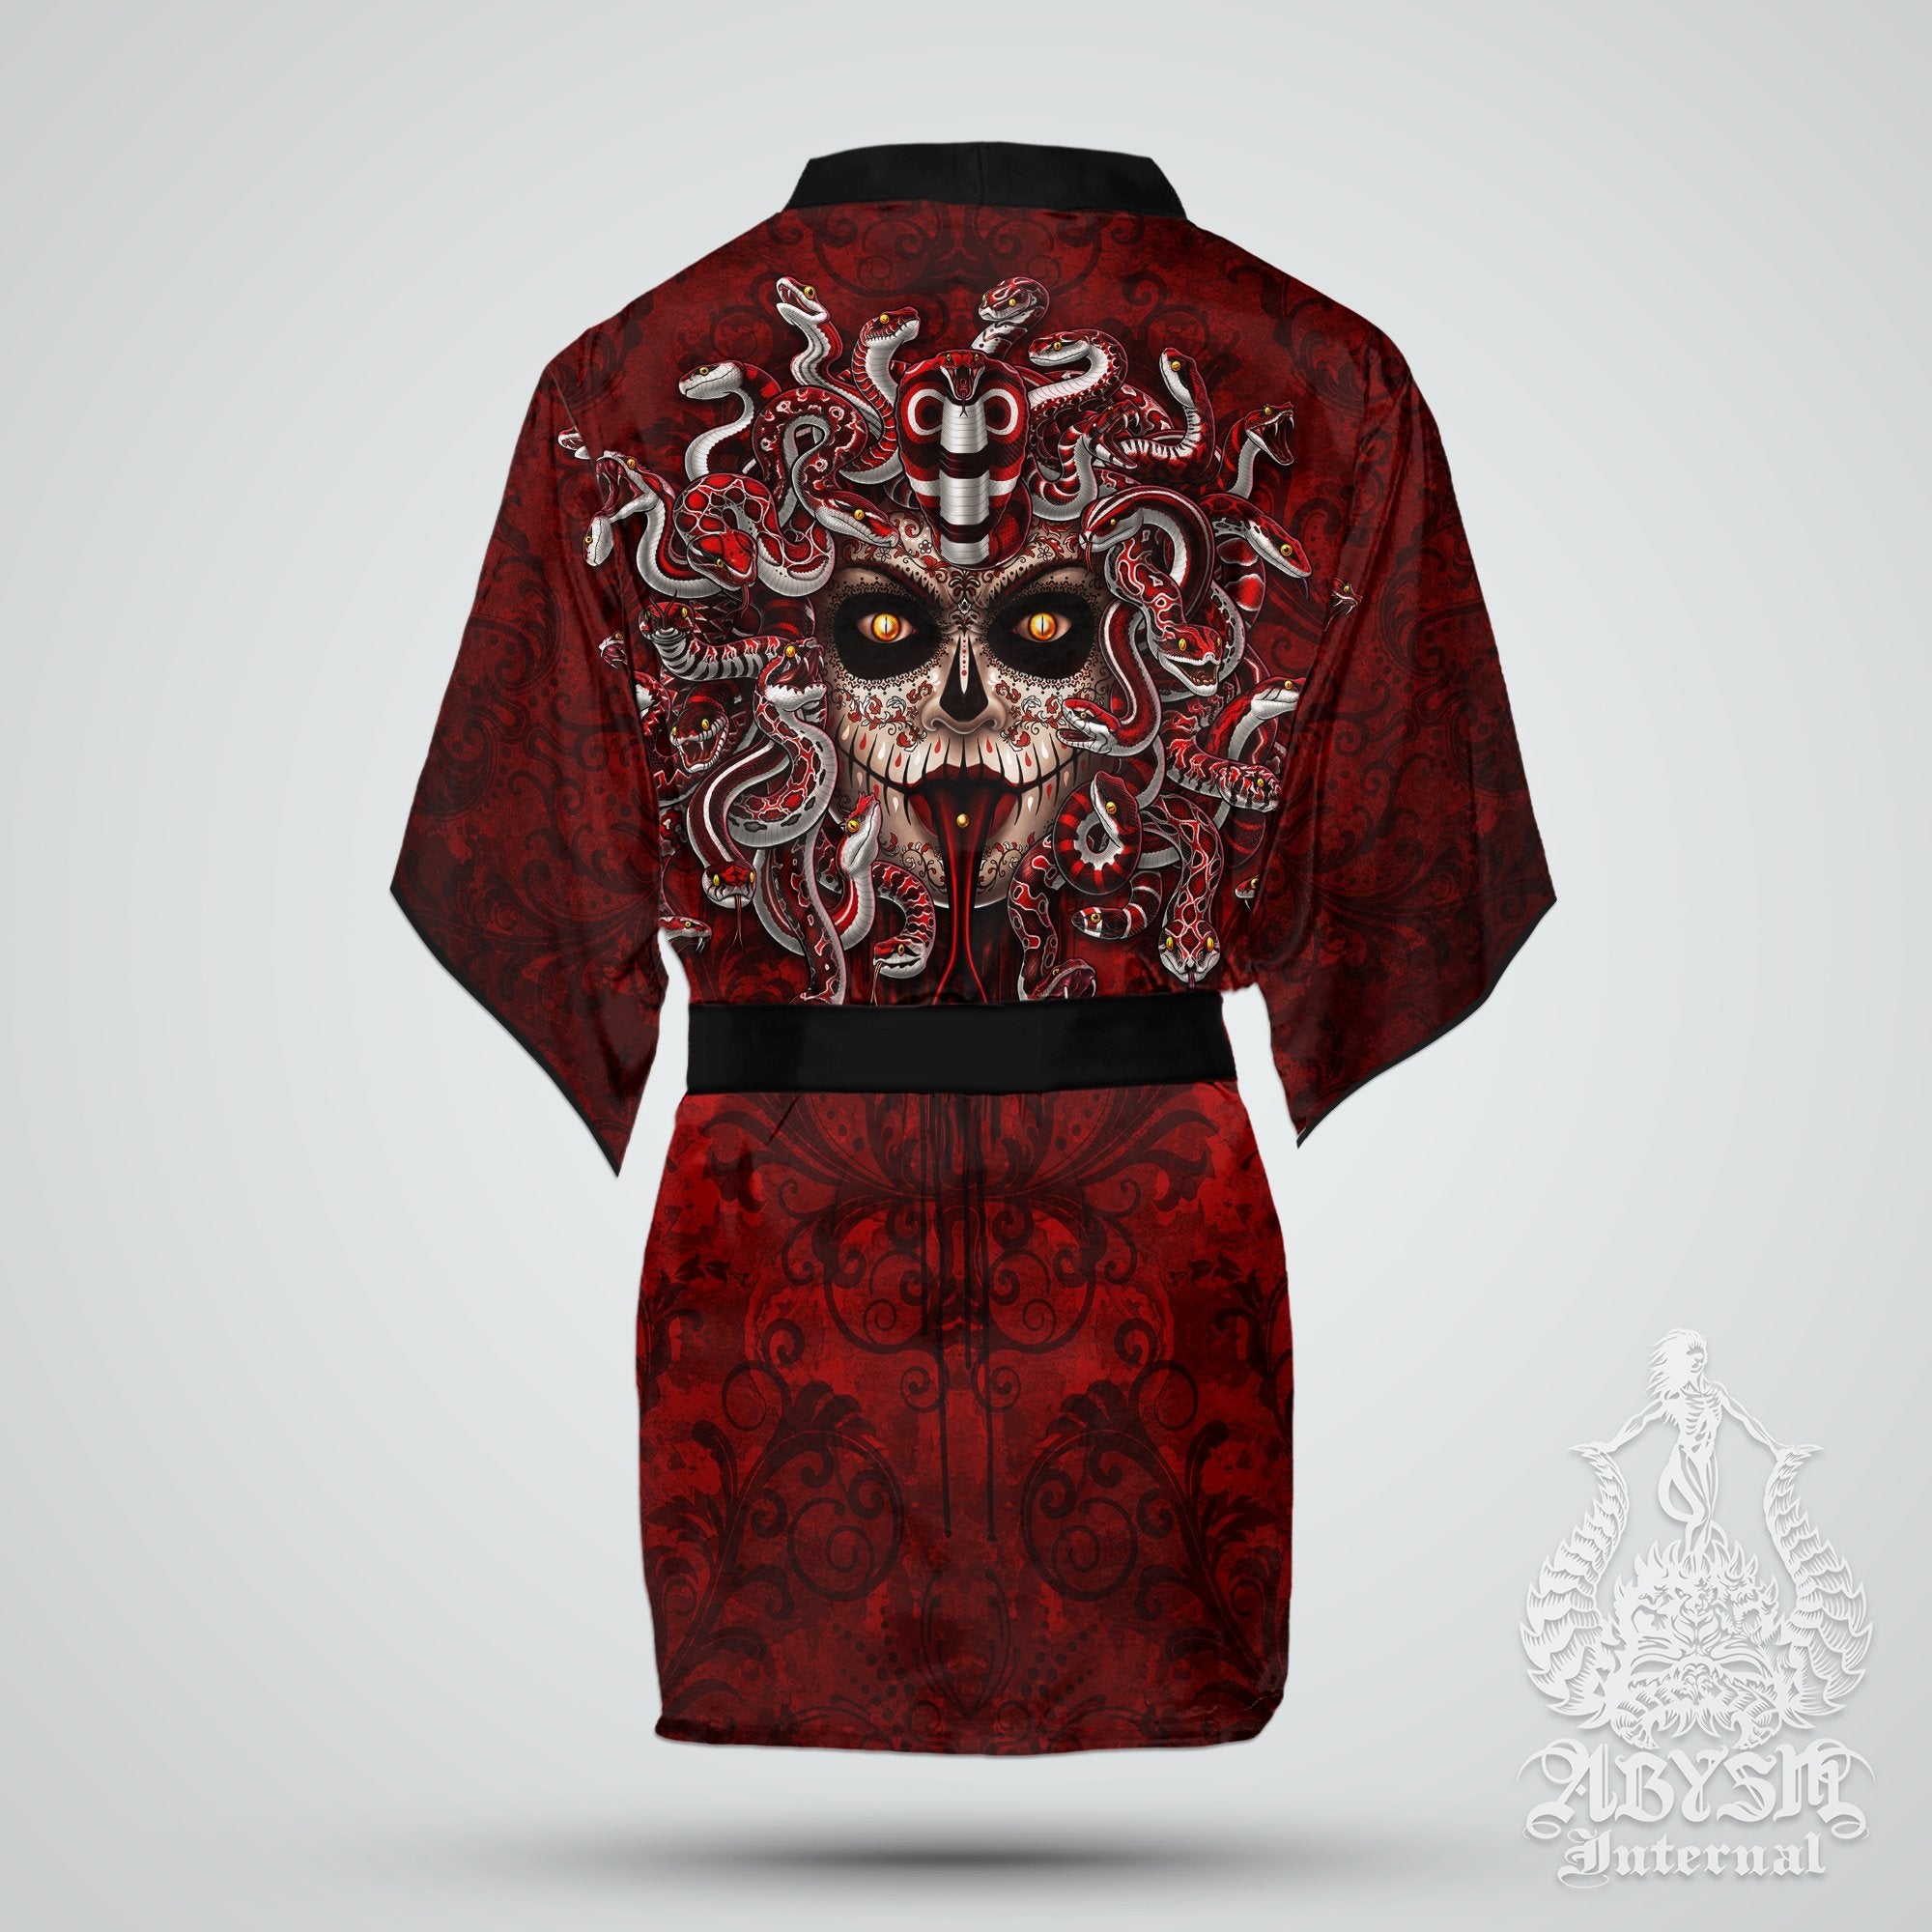 Medusa Cover Up, Beach Outfit, Party Kimono, Summer Festival Robe, Gothic Indie and Alternative Clothing, Unisex - Catrina, Day of the Dead - Abysm Internal